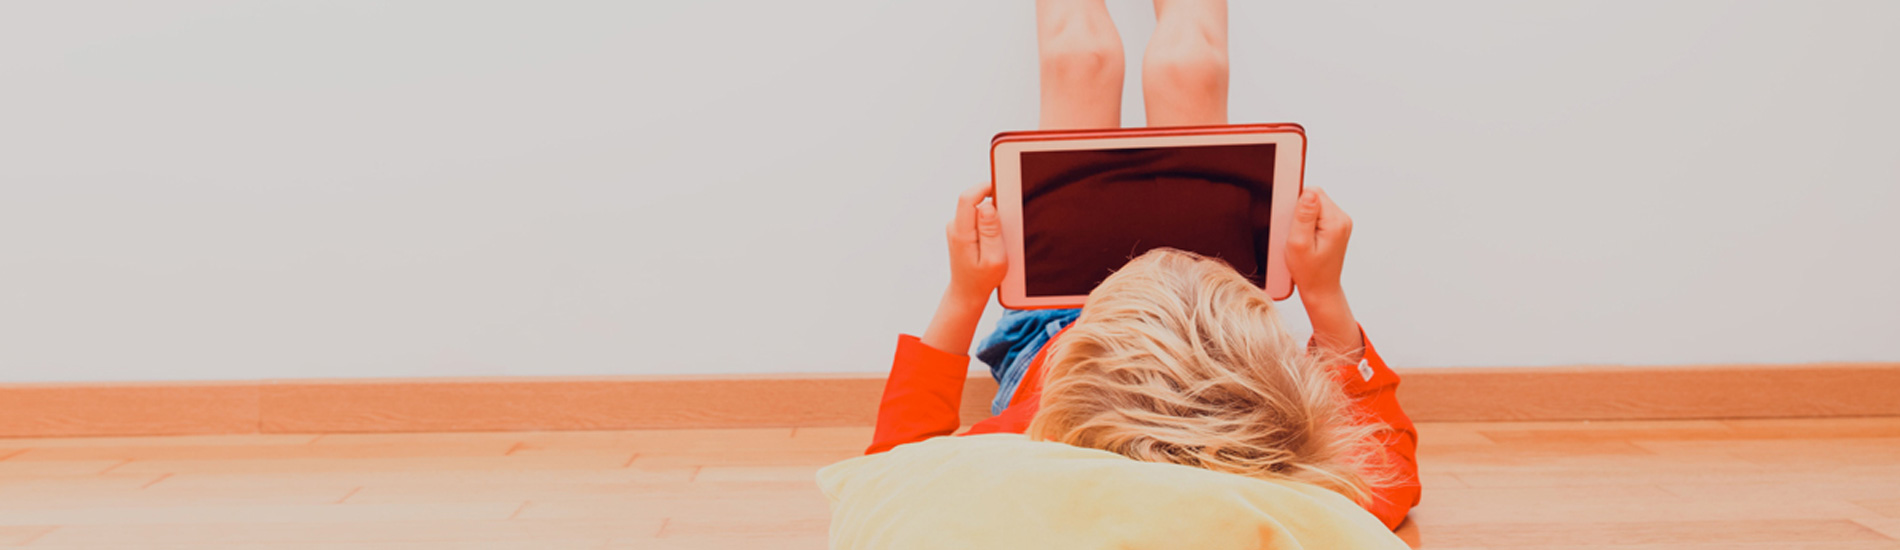 A young person laying on their back looking at a tablet device